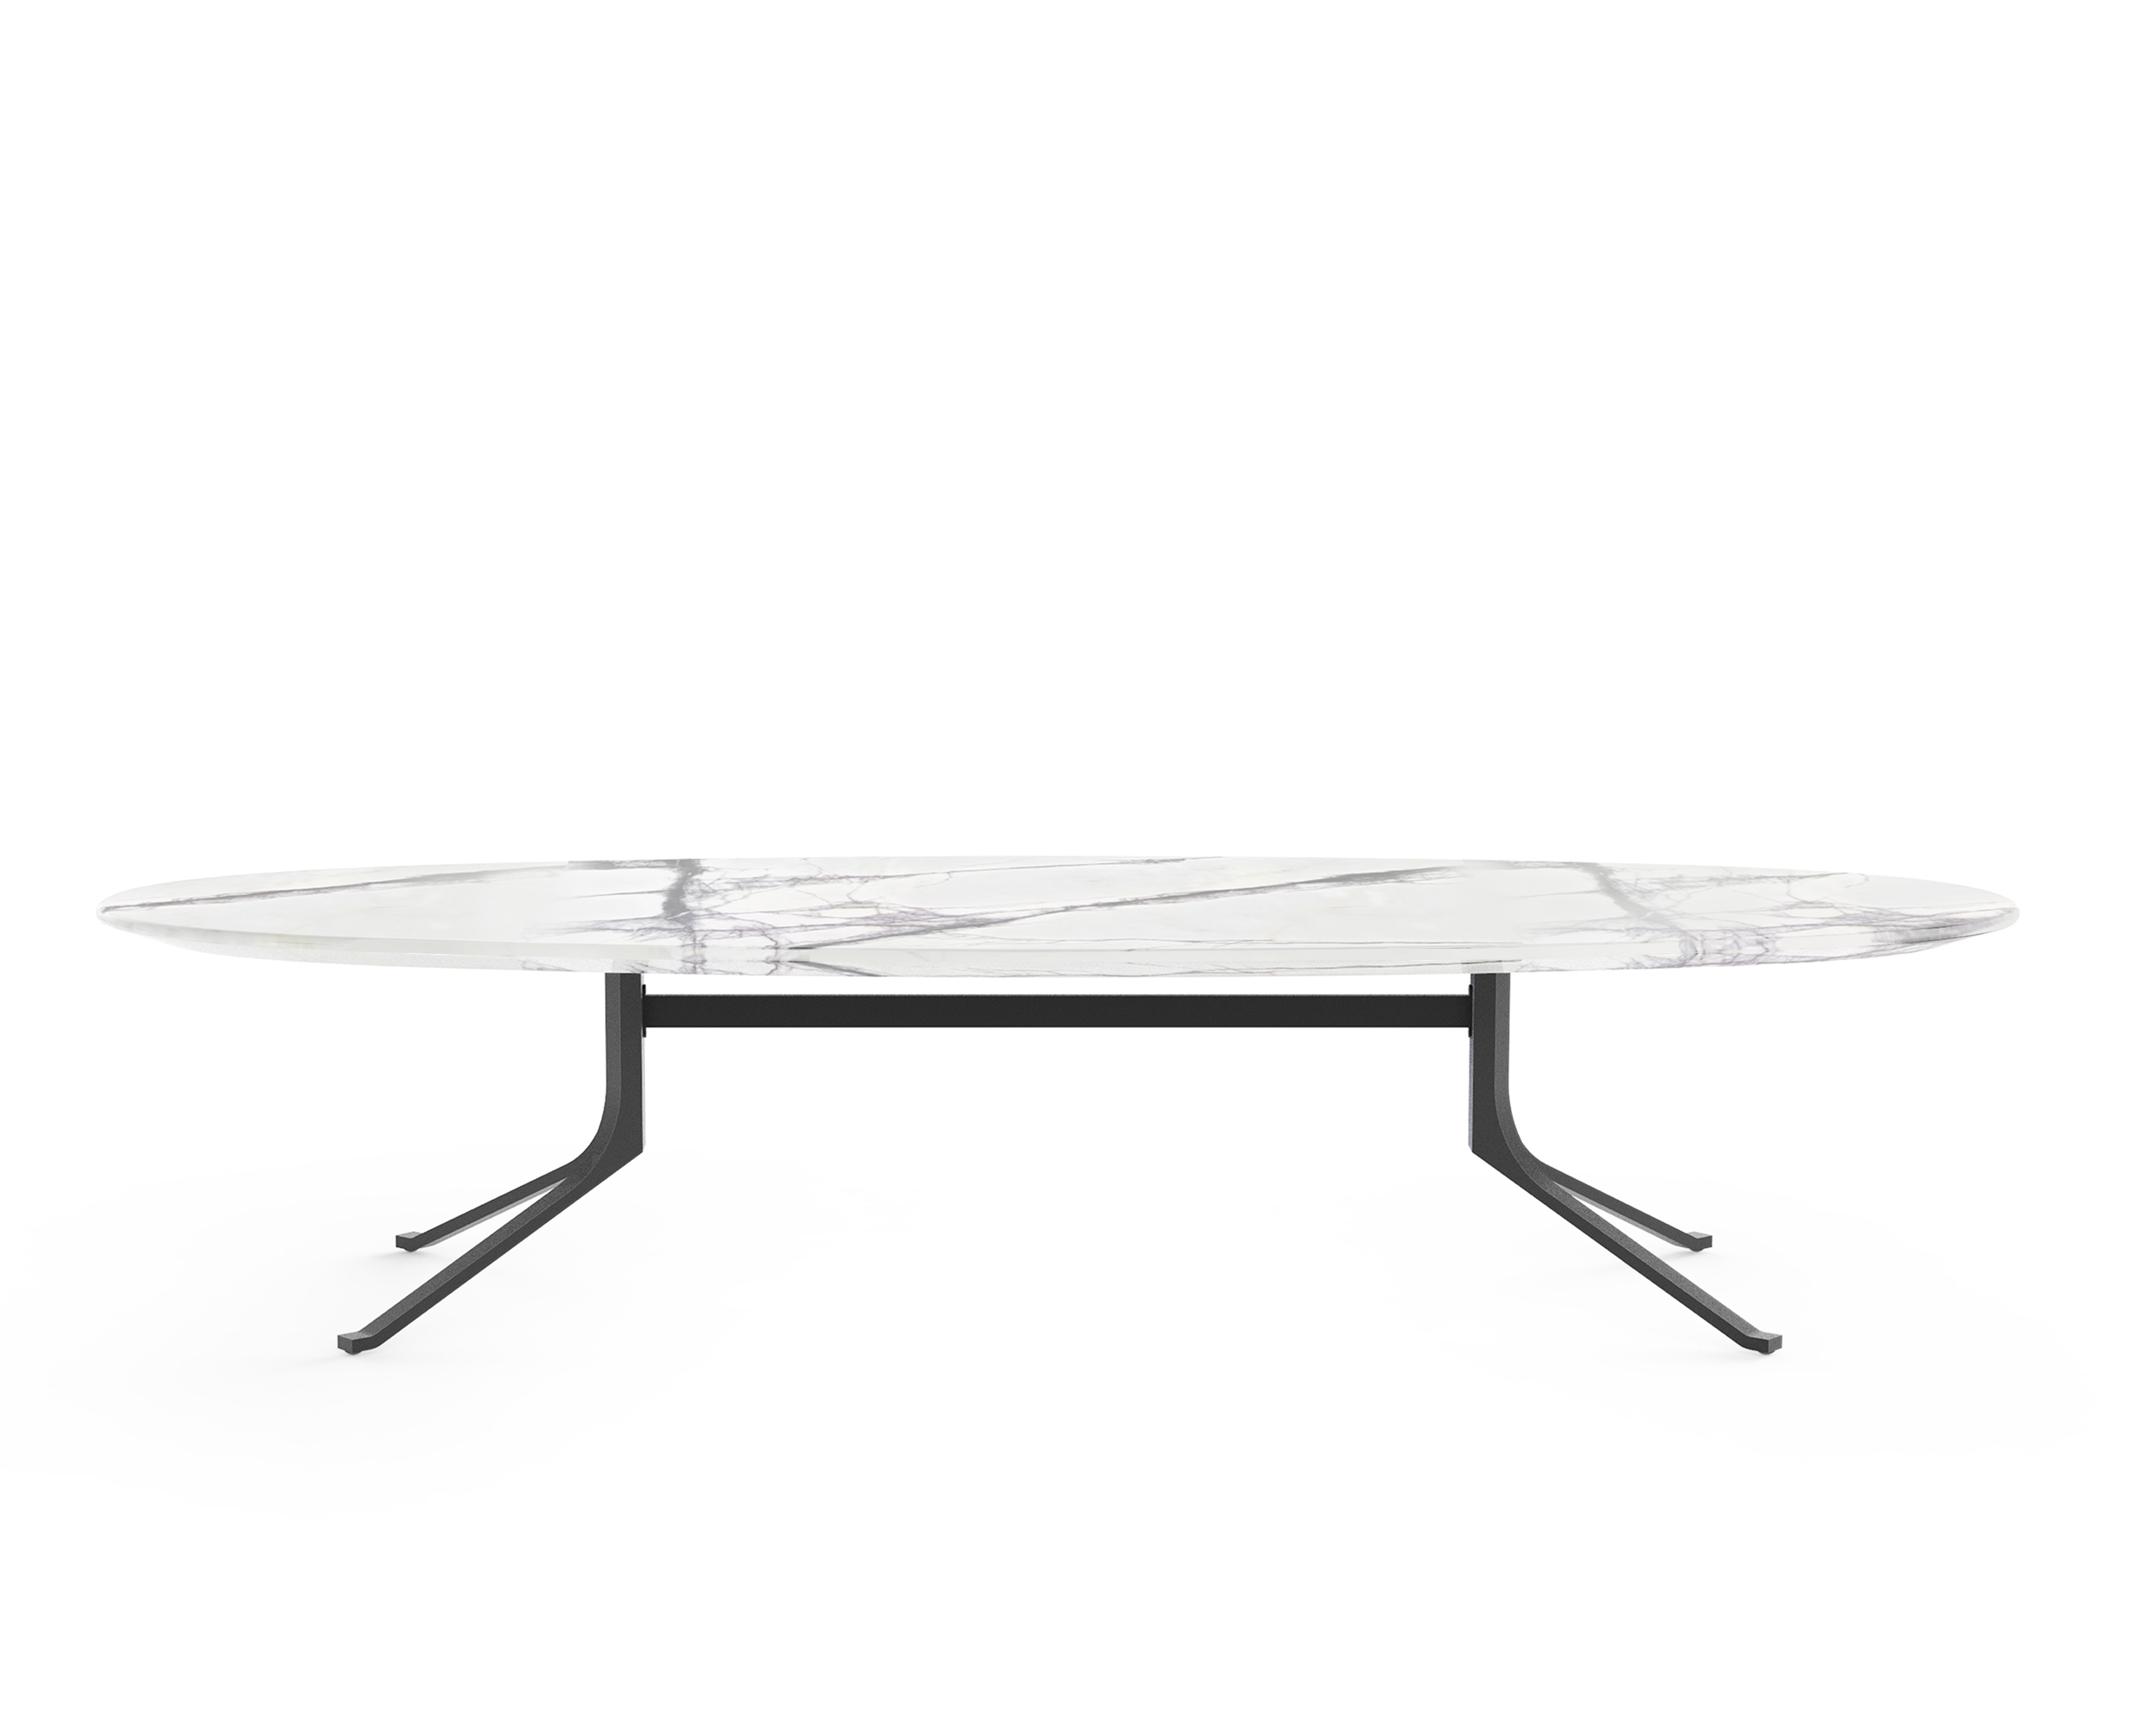 Blink Oval Coffee Table – Stone Top